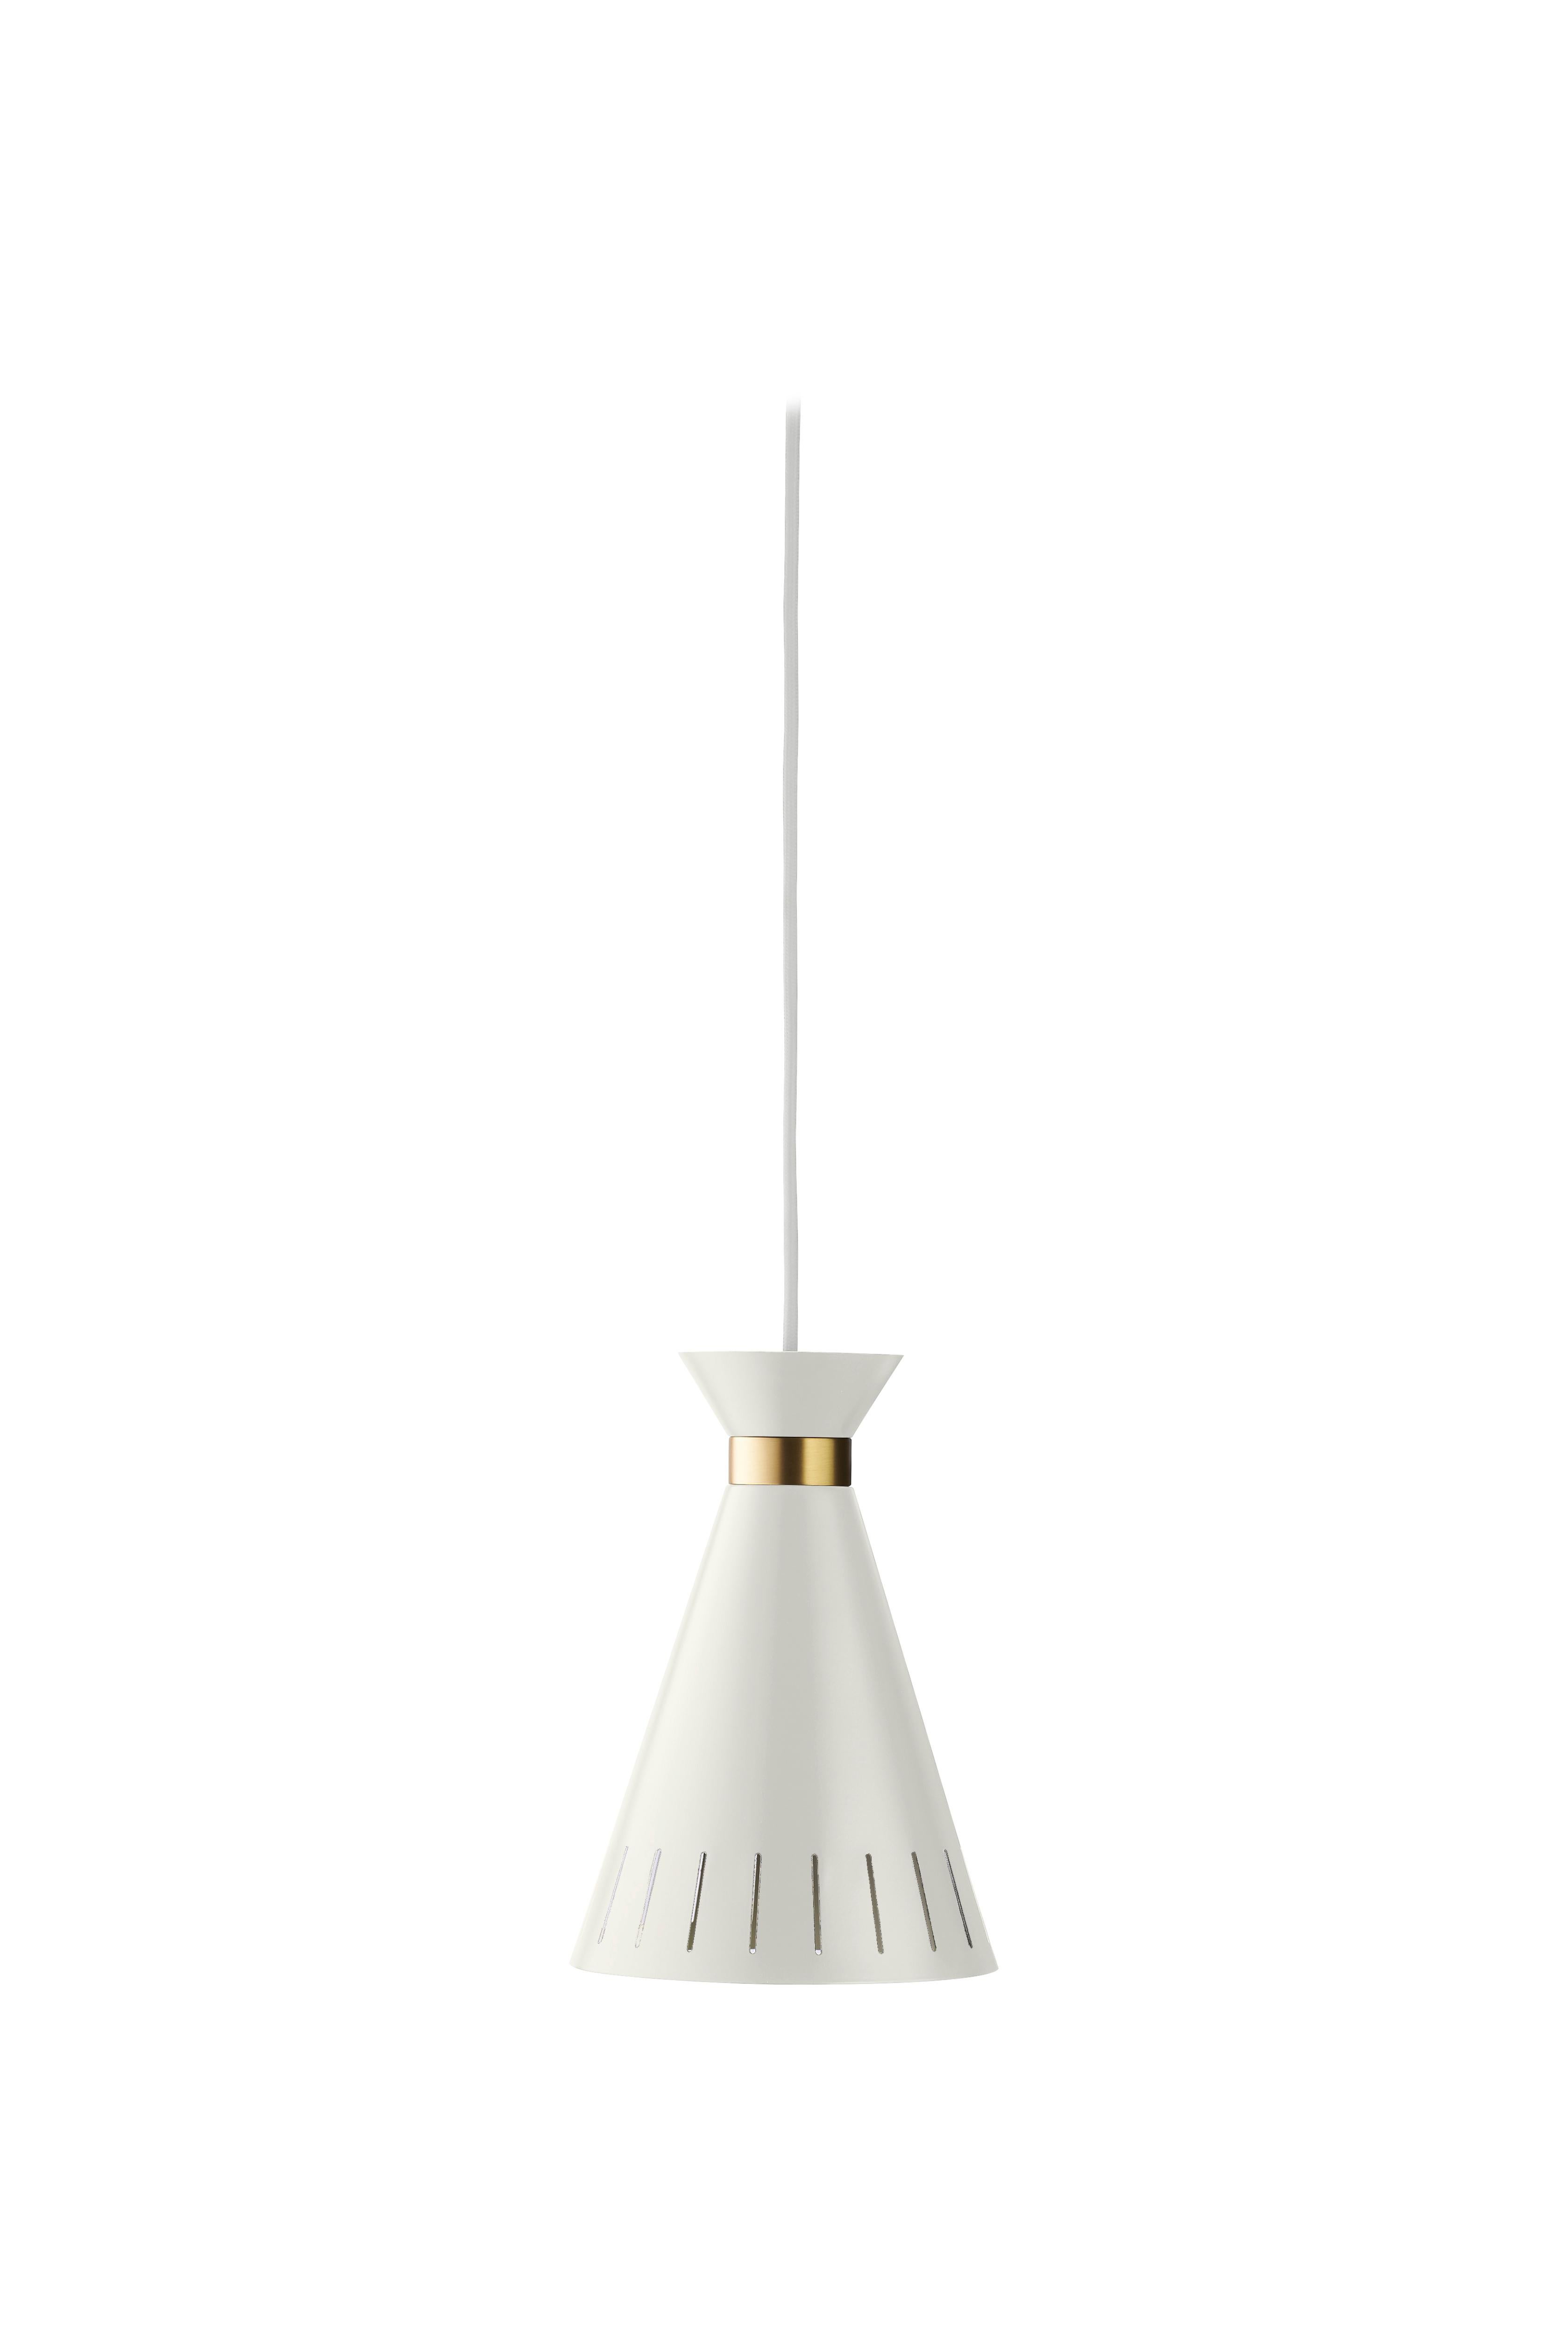 For Sale: White (Warm White) Cone Pendant, by Svend Aage Holm-Sørensen from Warm Nordic